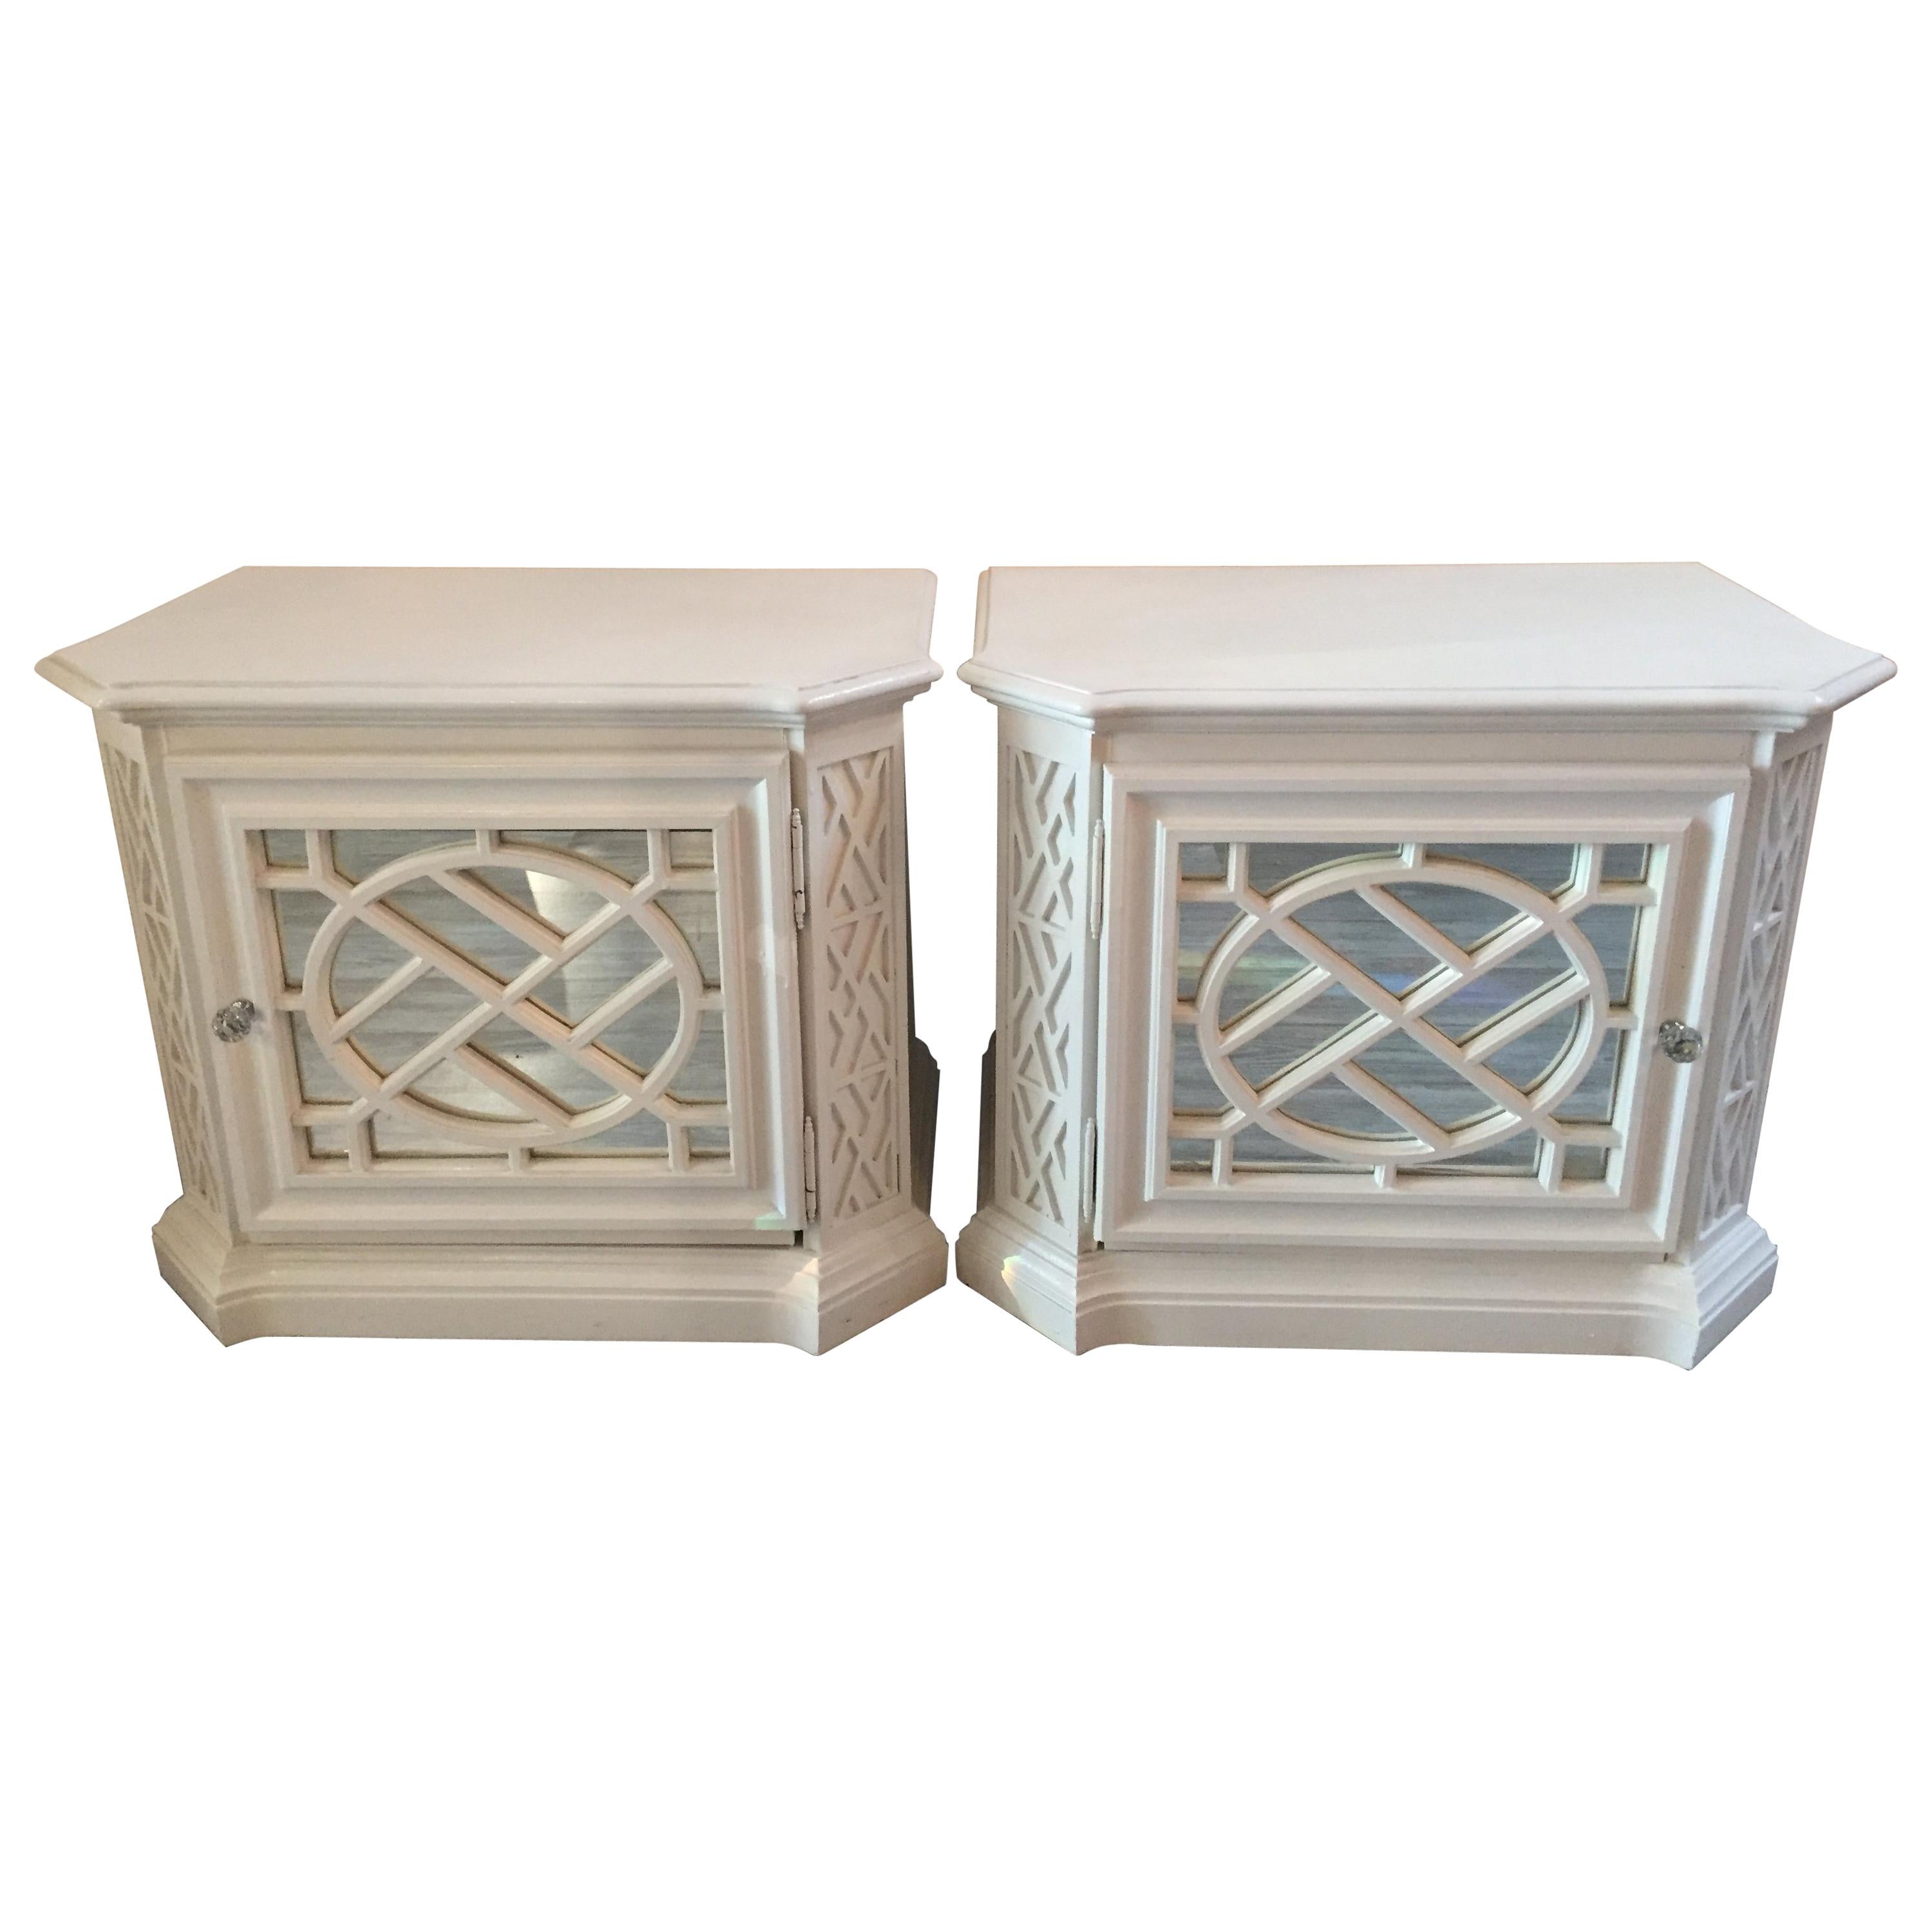 Pair of White Painted and Mirrored Glamorous Hollywood Regency Nightstands